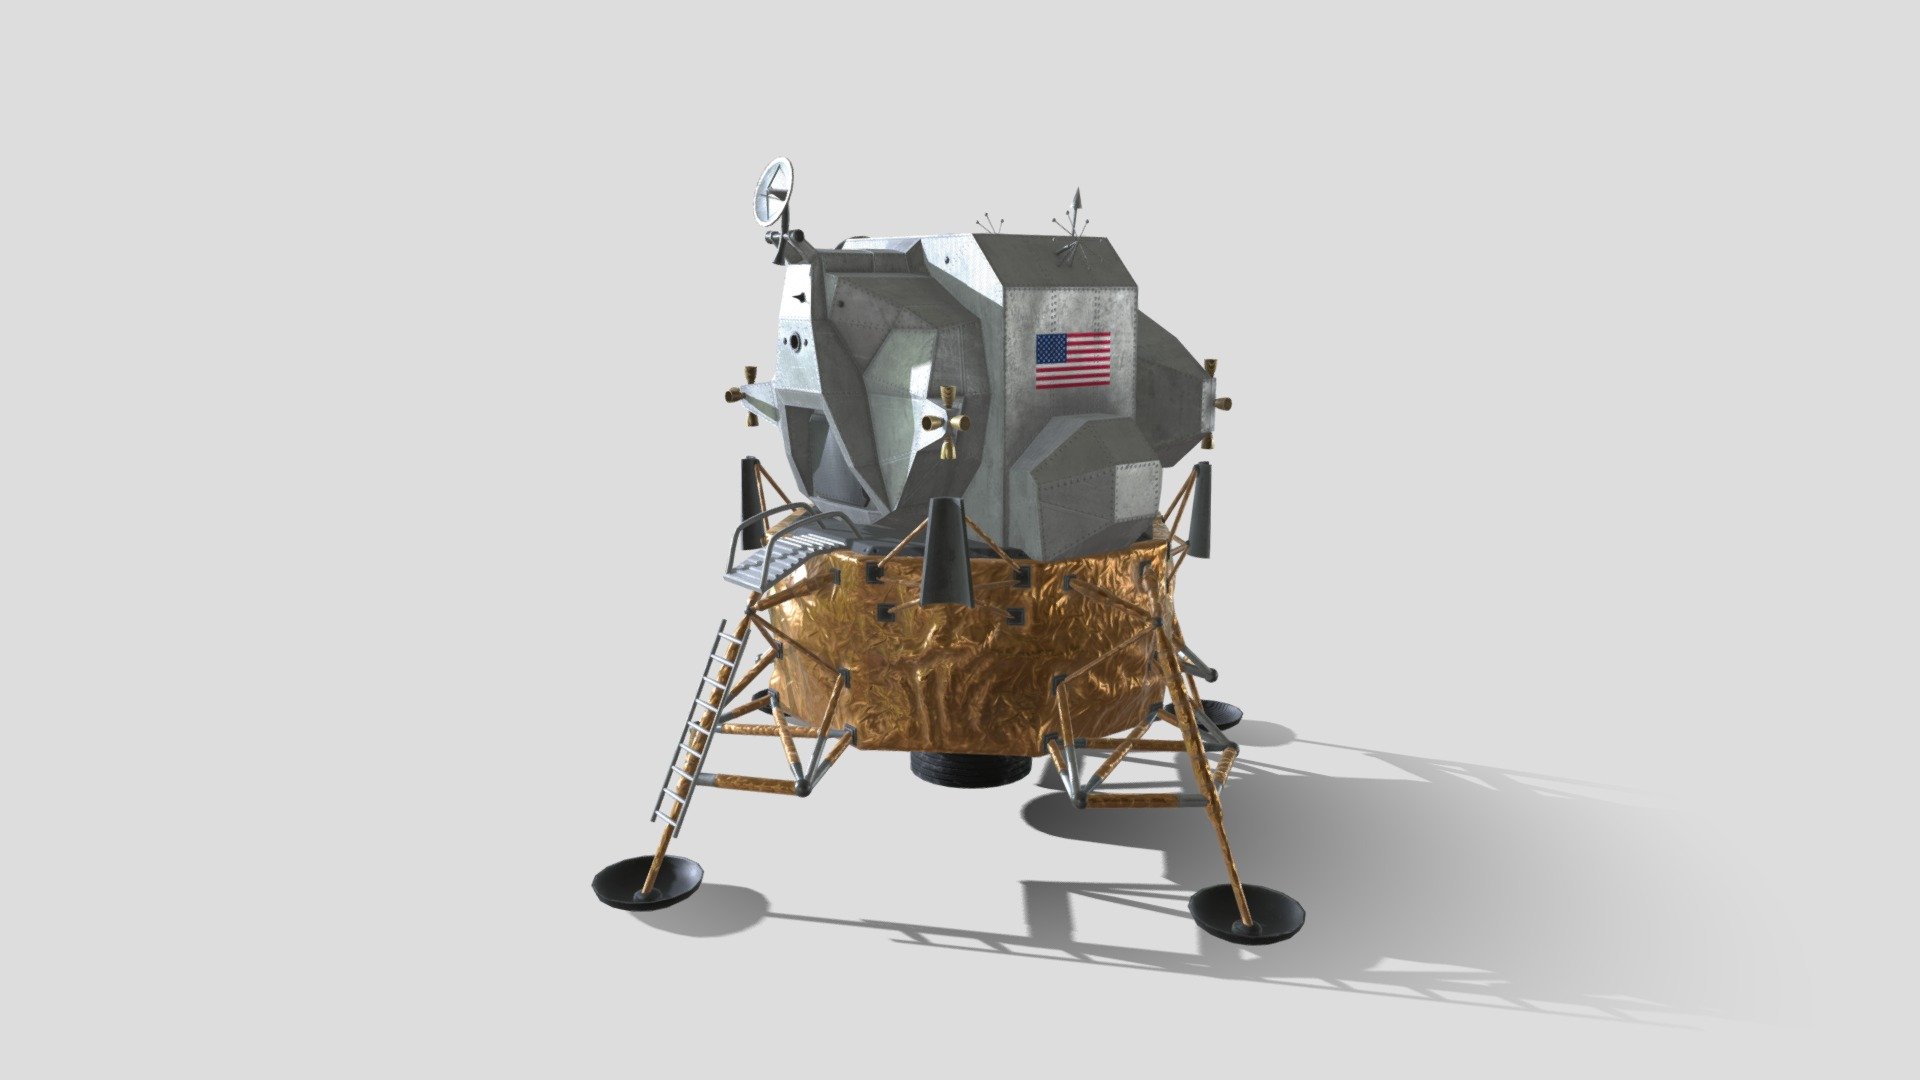 This Moon Lander is a great model for any space exploration or sci-fi scene. The model is Highly detailed especially with the PBR Textures, The model is viewable from all angles and Distances.

This Includes:

The mesh
-4K and 2K Textures (Albedo, Metallic, Roughness, Normal, Height)

The mesh is UV Unwrapped with vertex colors for easy retexturing 3d model